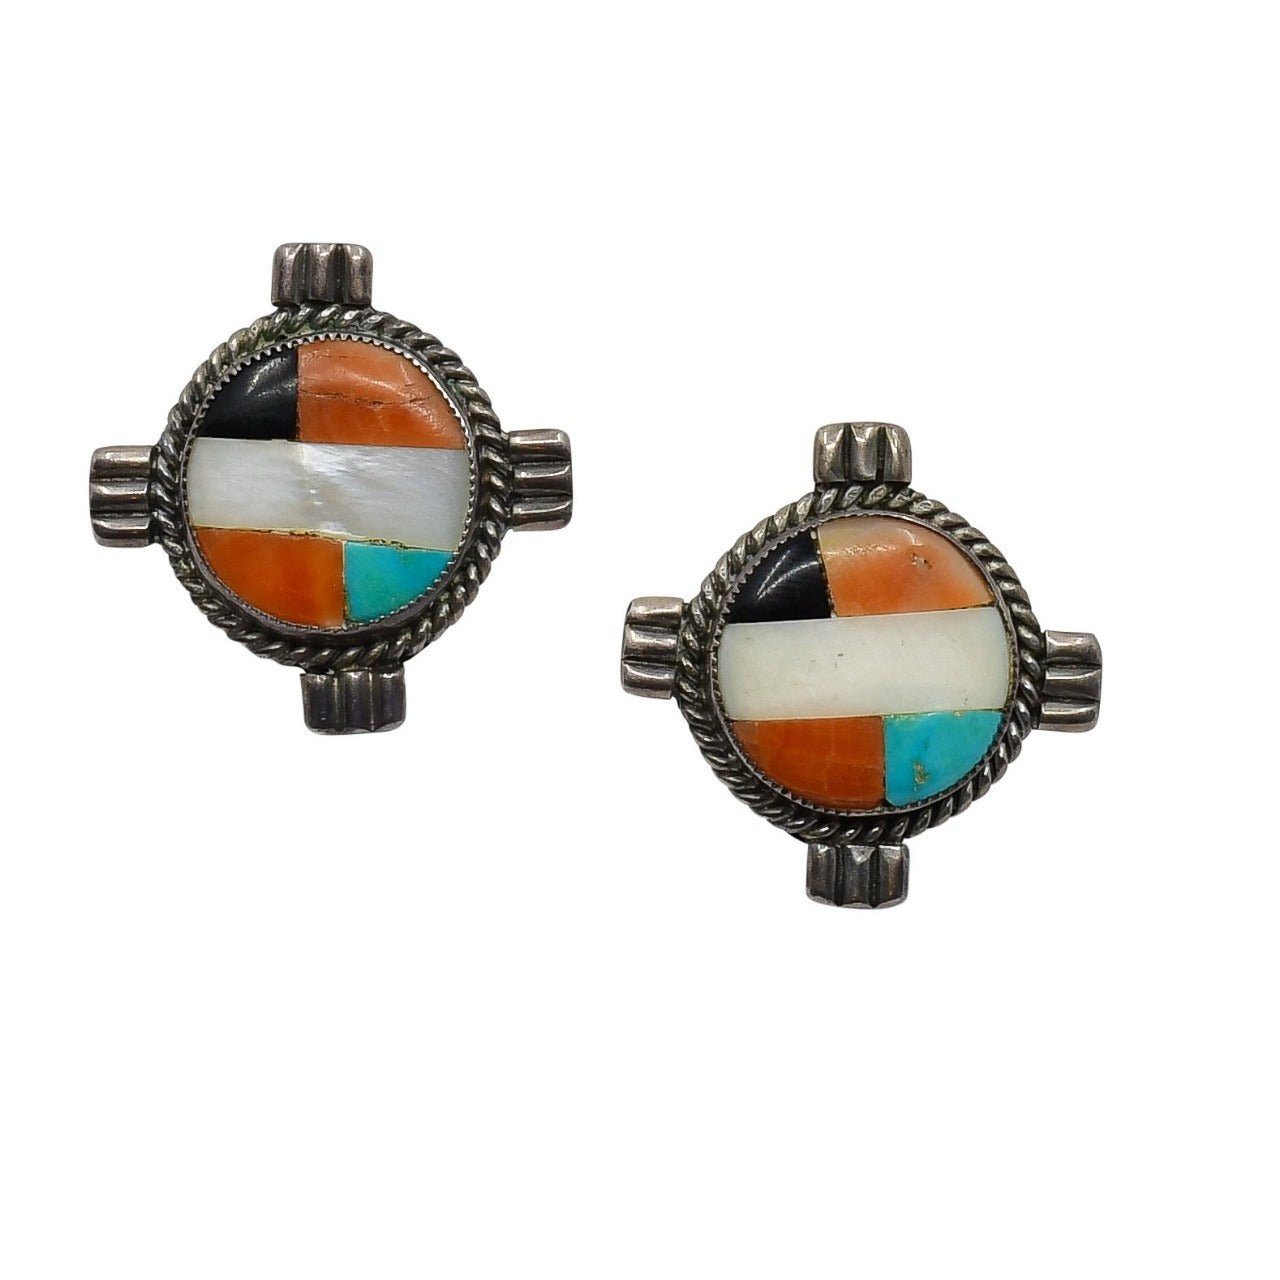 Vintage Zuni Earrings of Mosaic Inlay Four Directions - Turquoise & Tufa